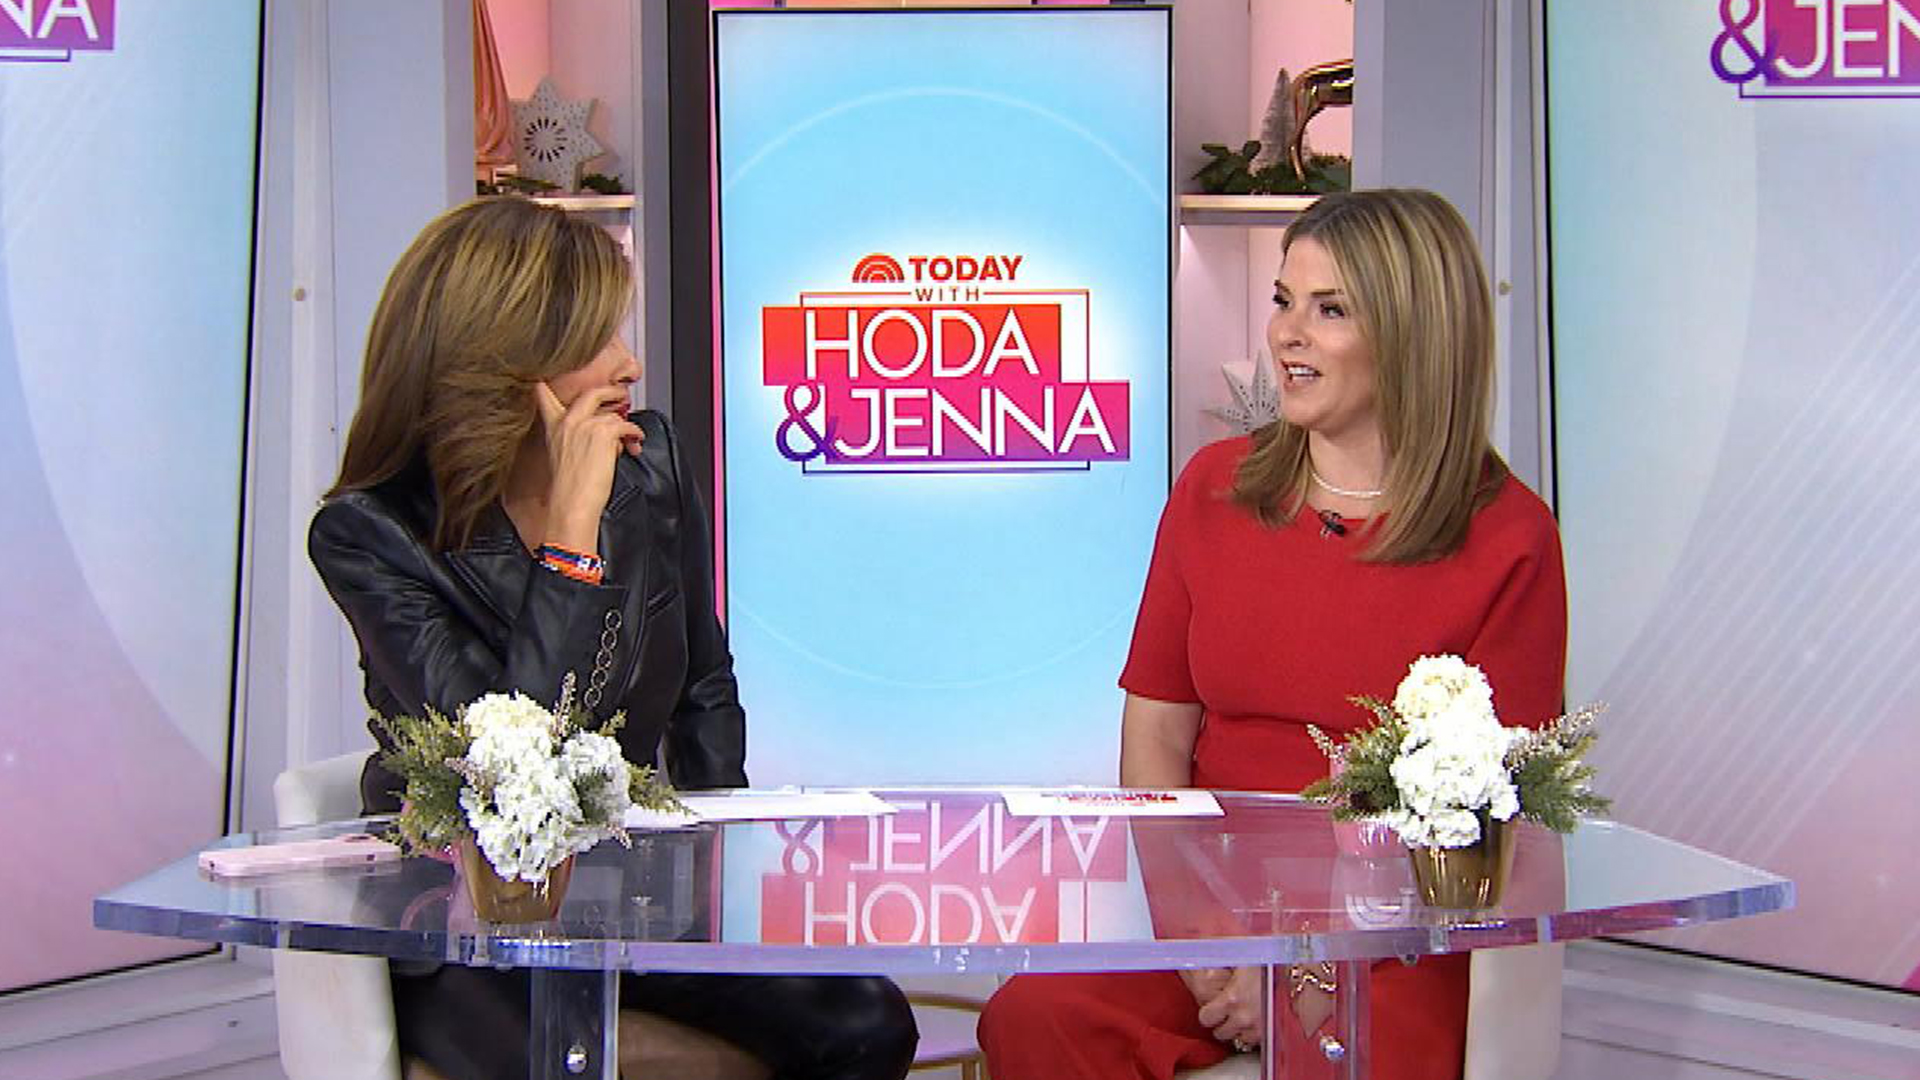 Hoda & Jenna open up about crying in front of their kids